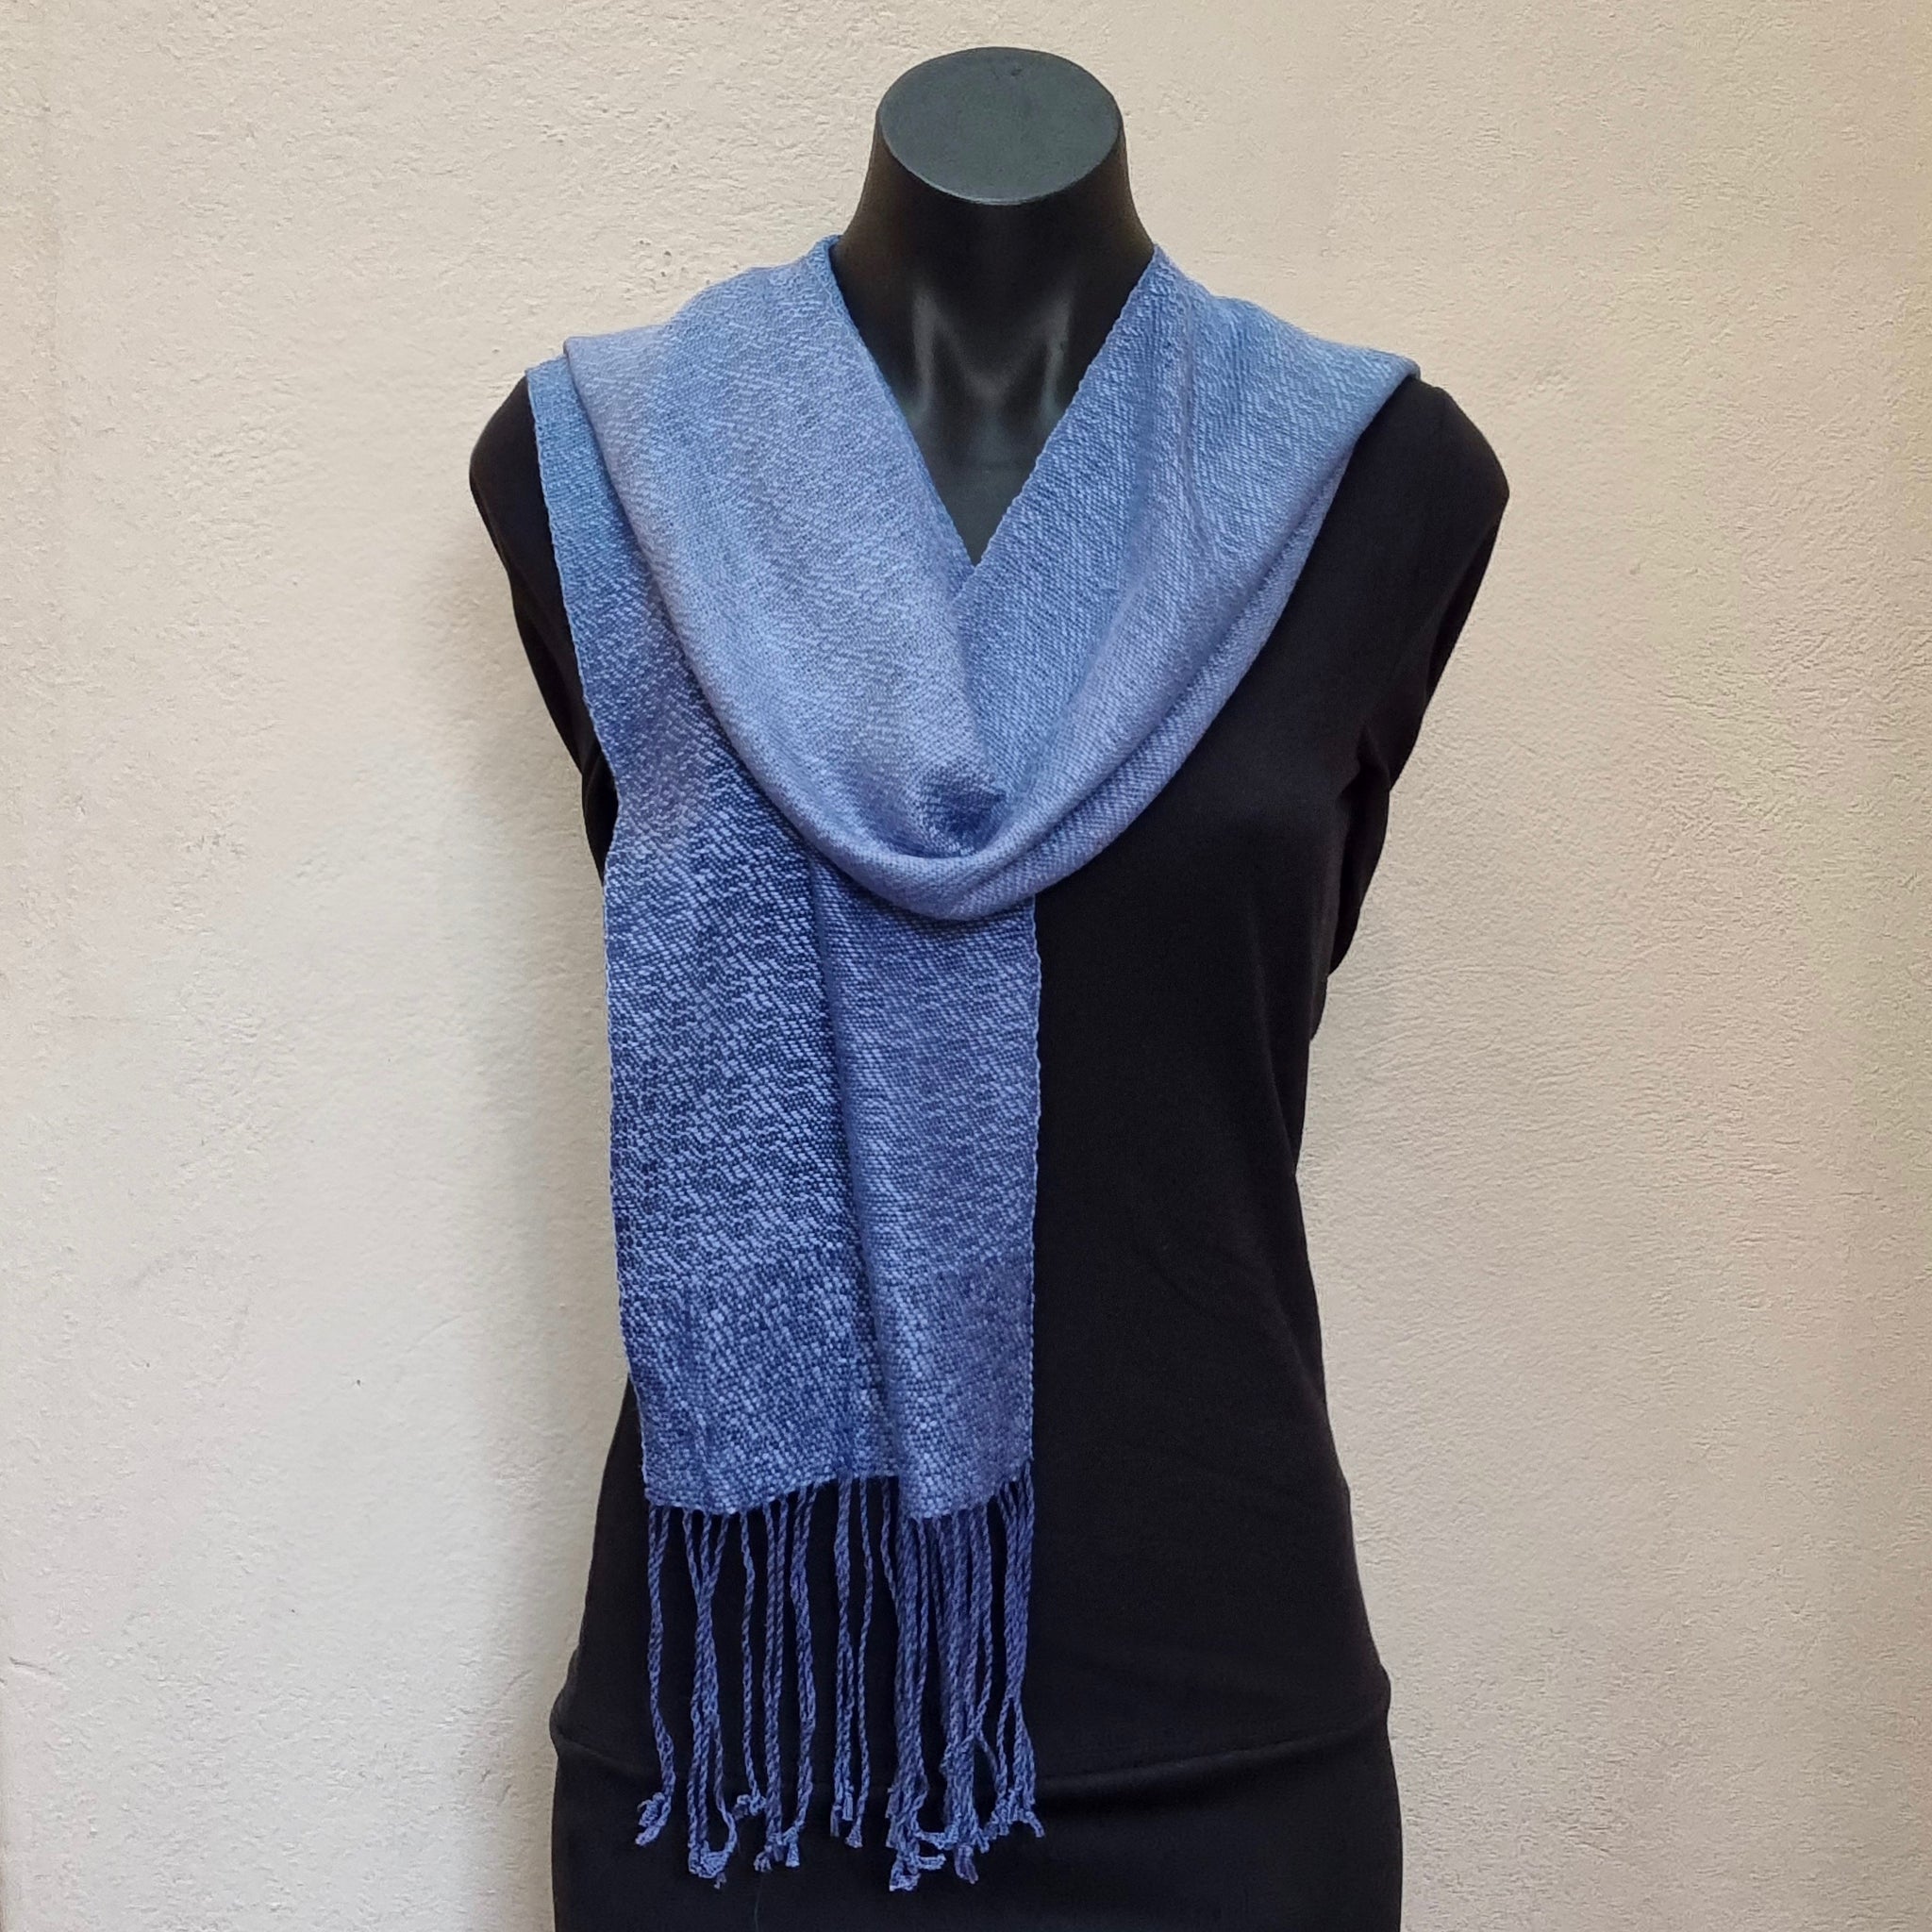 Silk scarf handwoven by Vicki Lowery